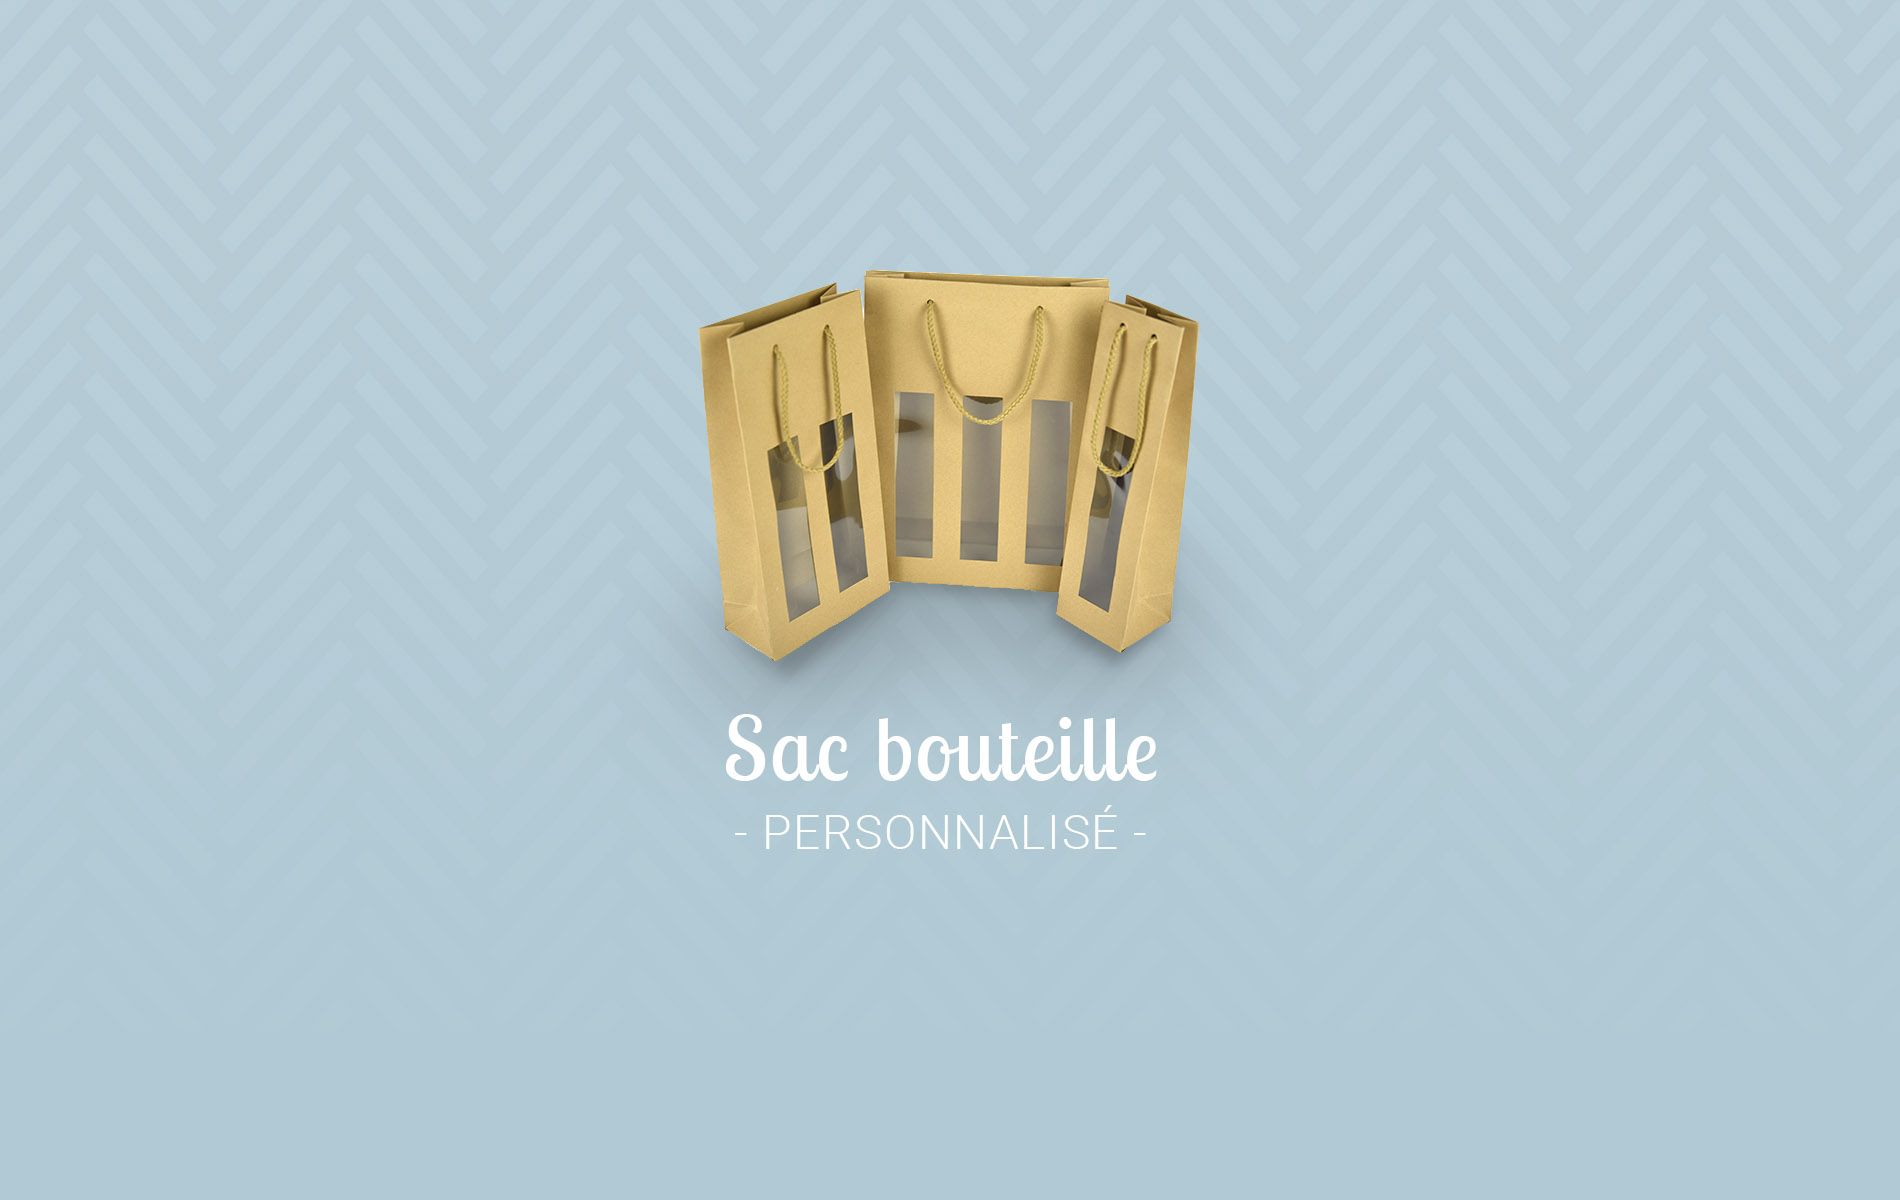 Sac bouteille